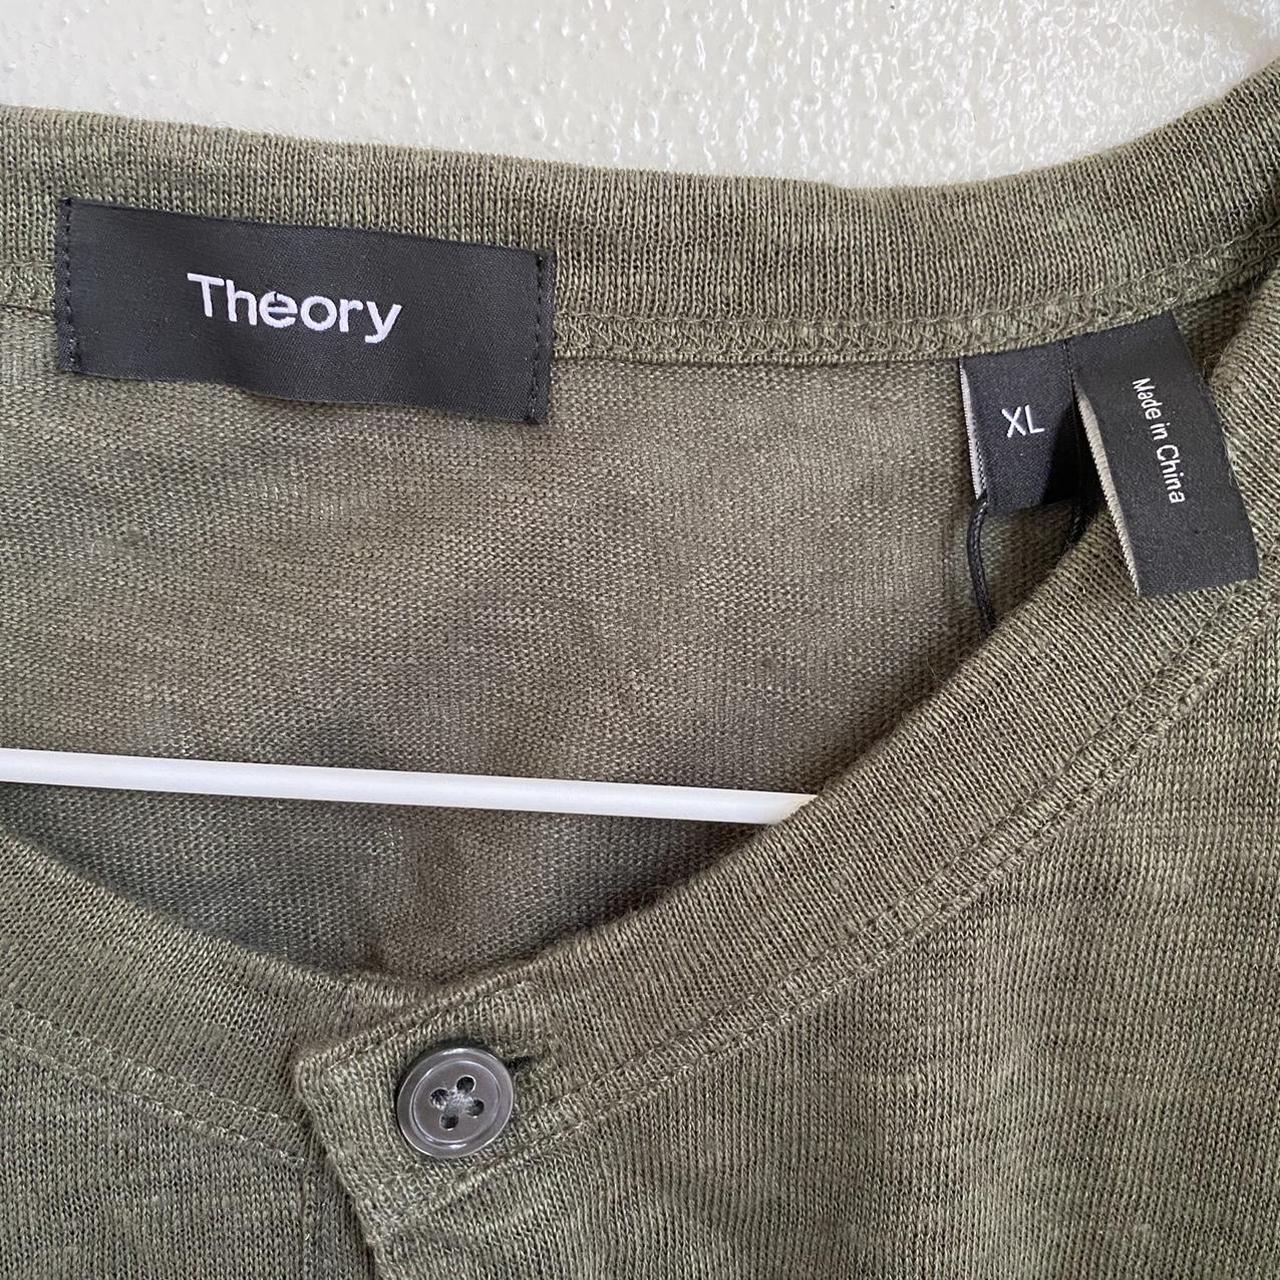 Product Image 2 - Theory- Henley Shirt - brand